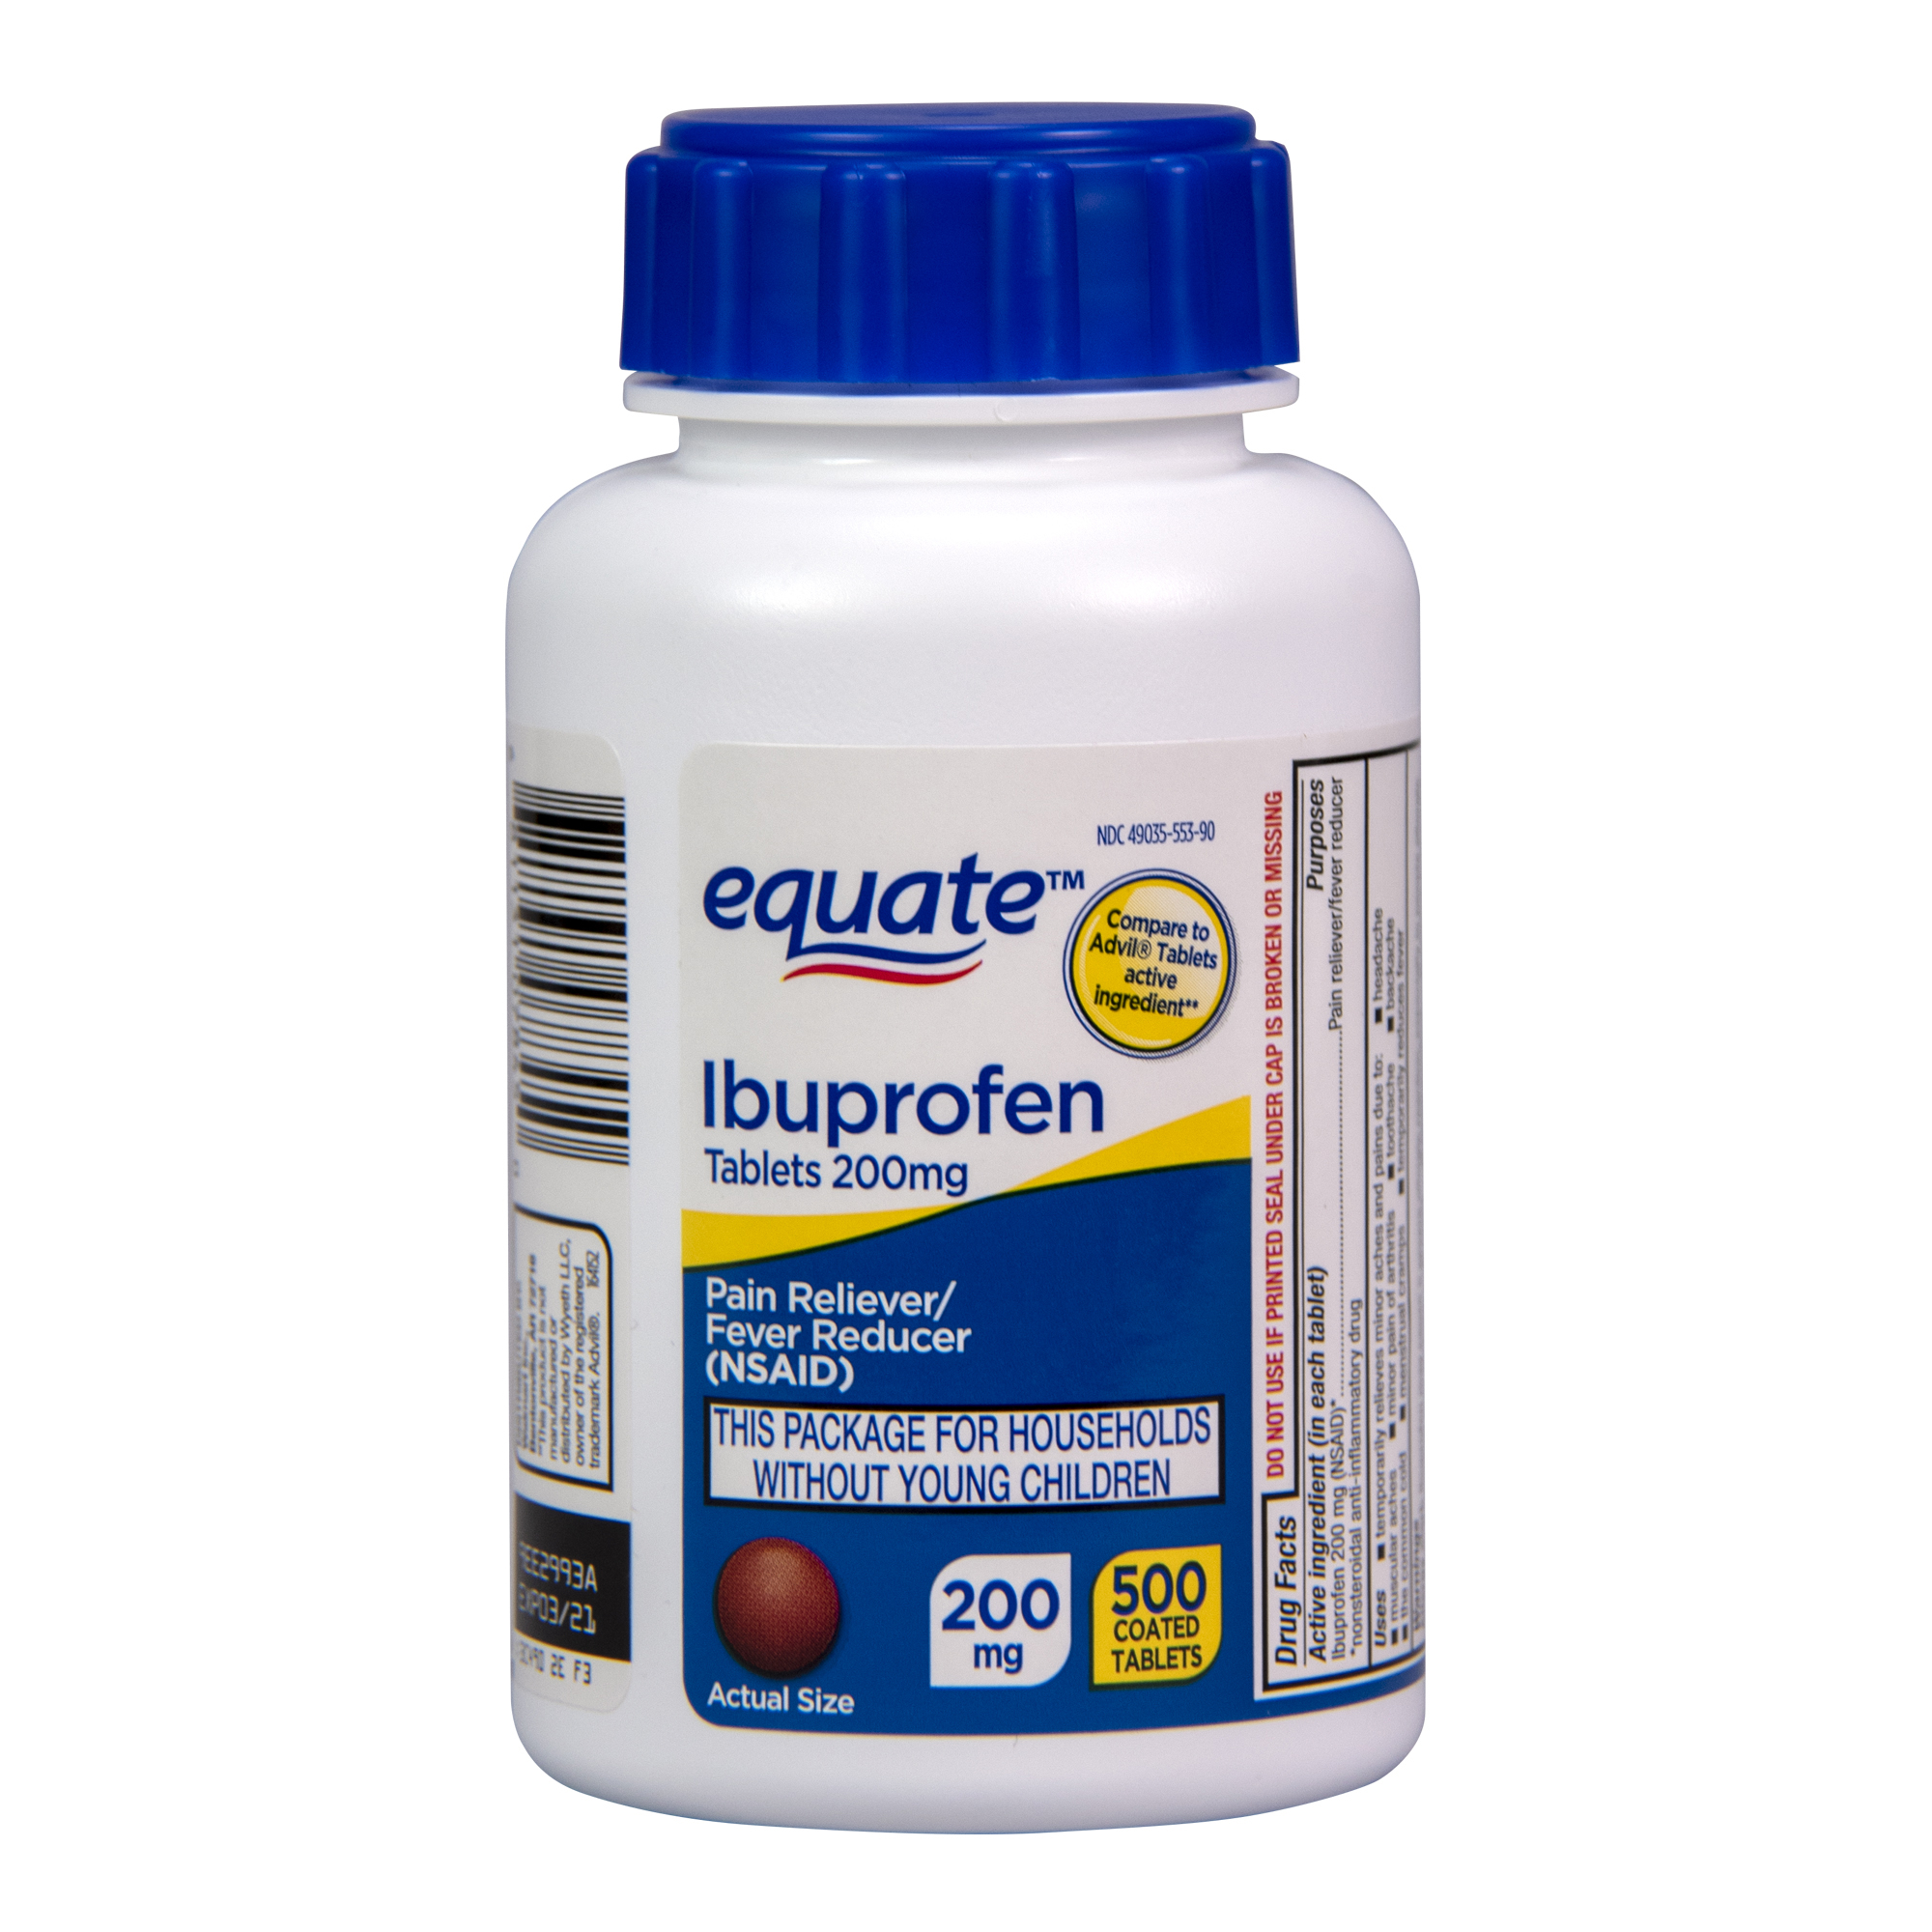 Equate Ibuprofen Tablets, 200 mg, Pain Reliever and Fever Reducer, 500 Count - image 1 of 8